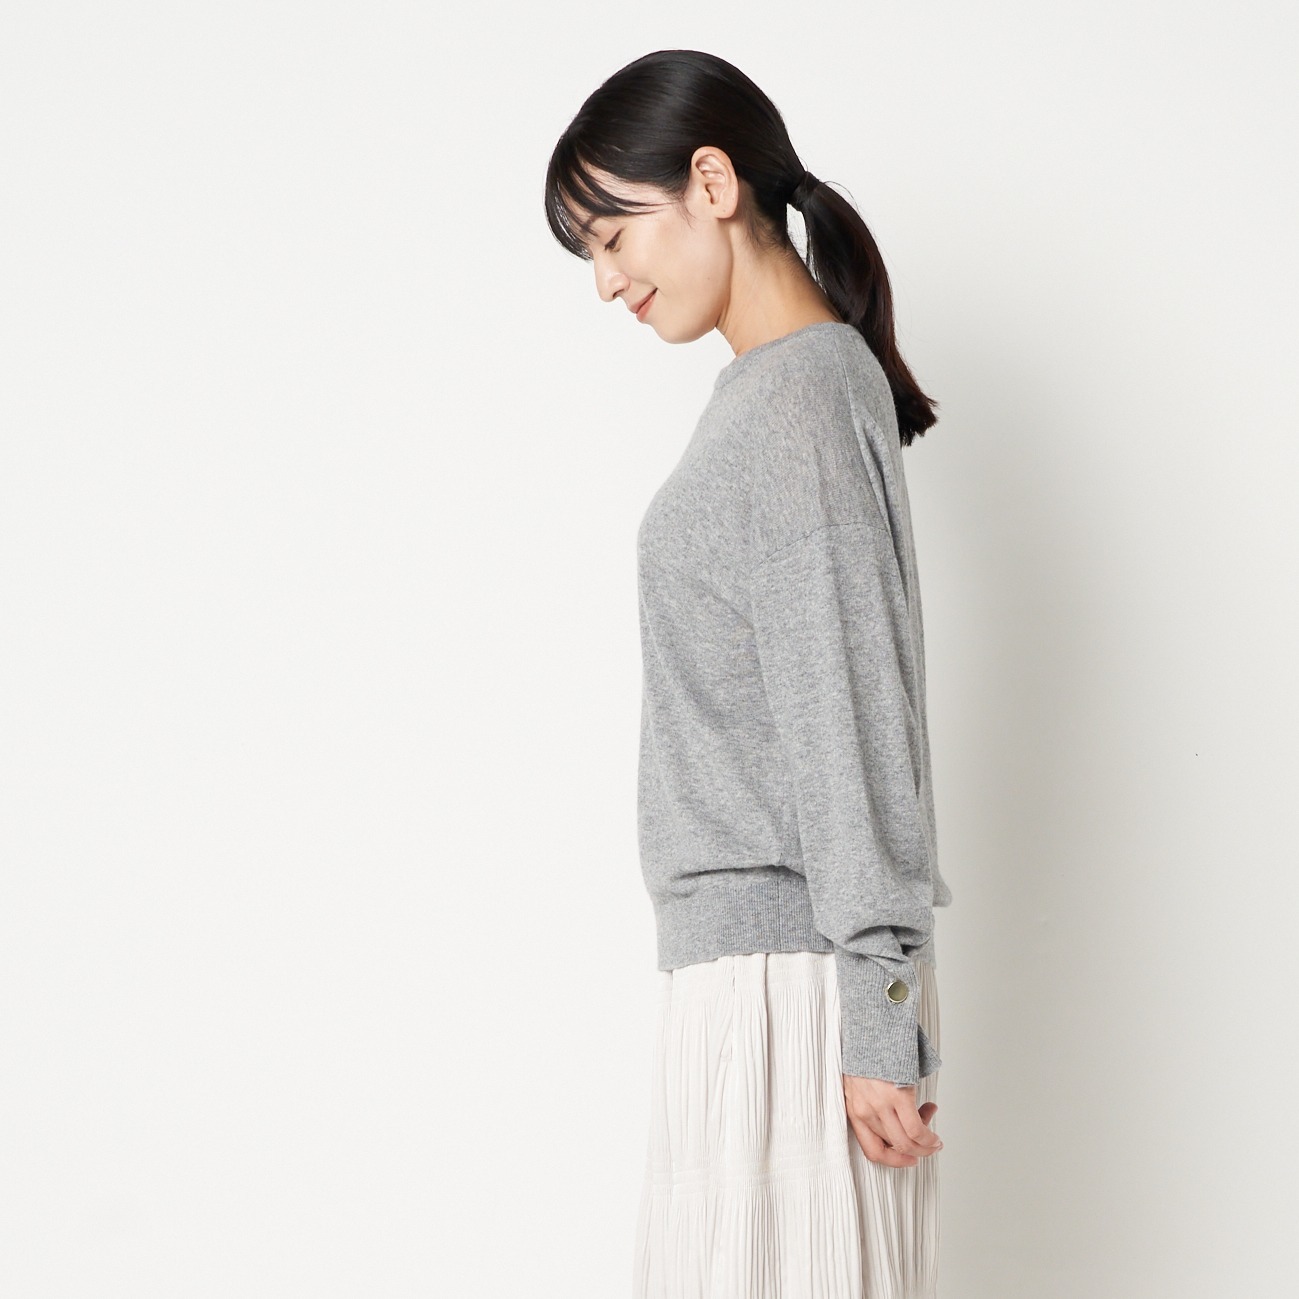 BUTTON SLEEVE KNIT 詳細画像 ミディアムグレー 7